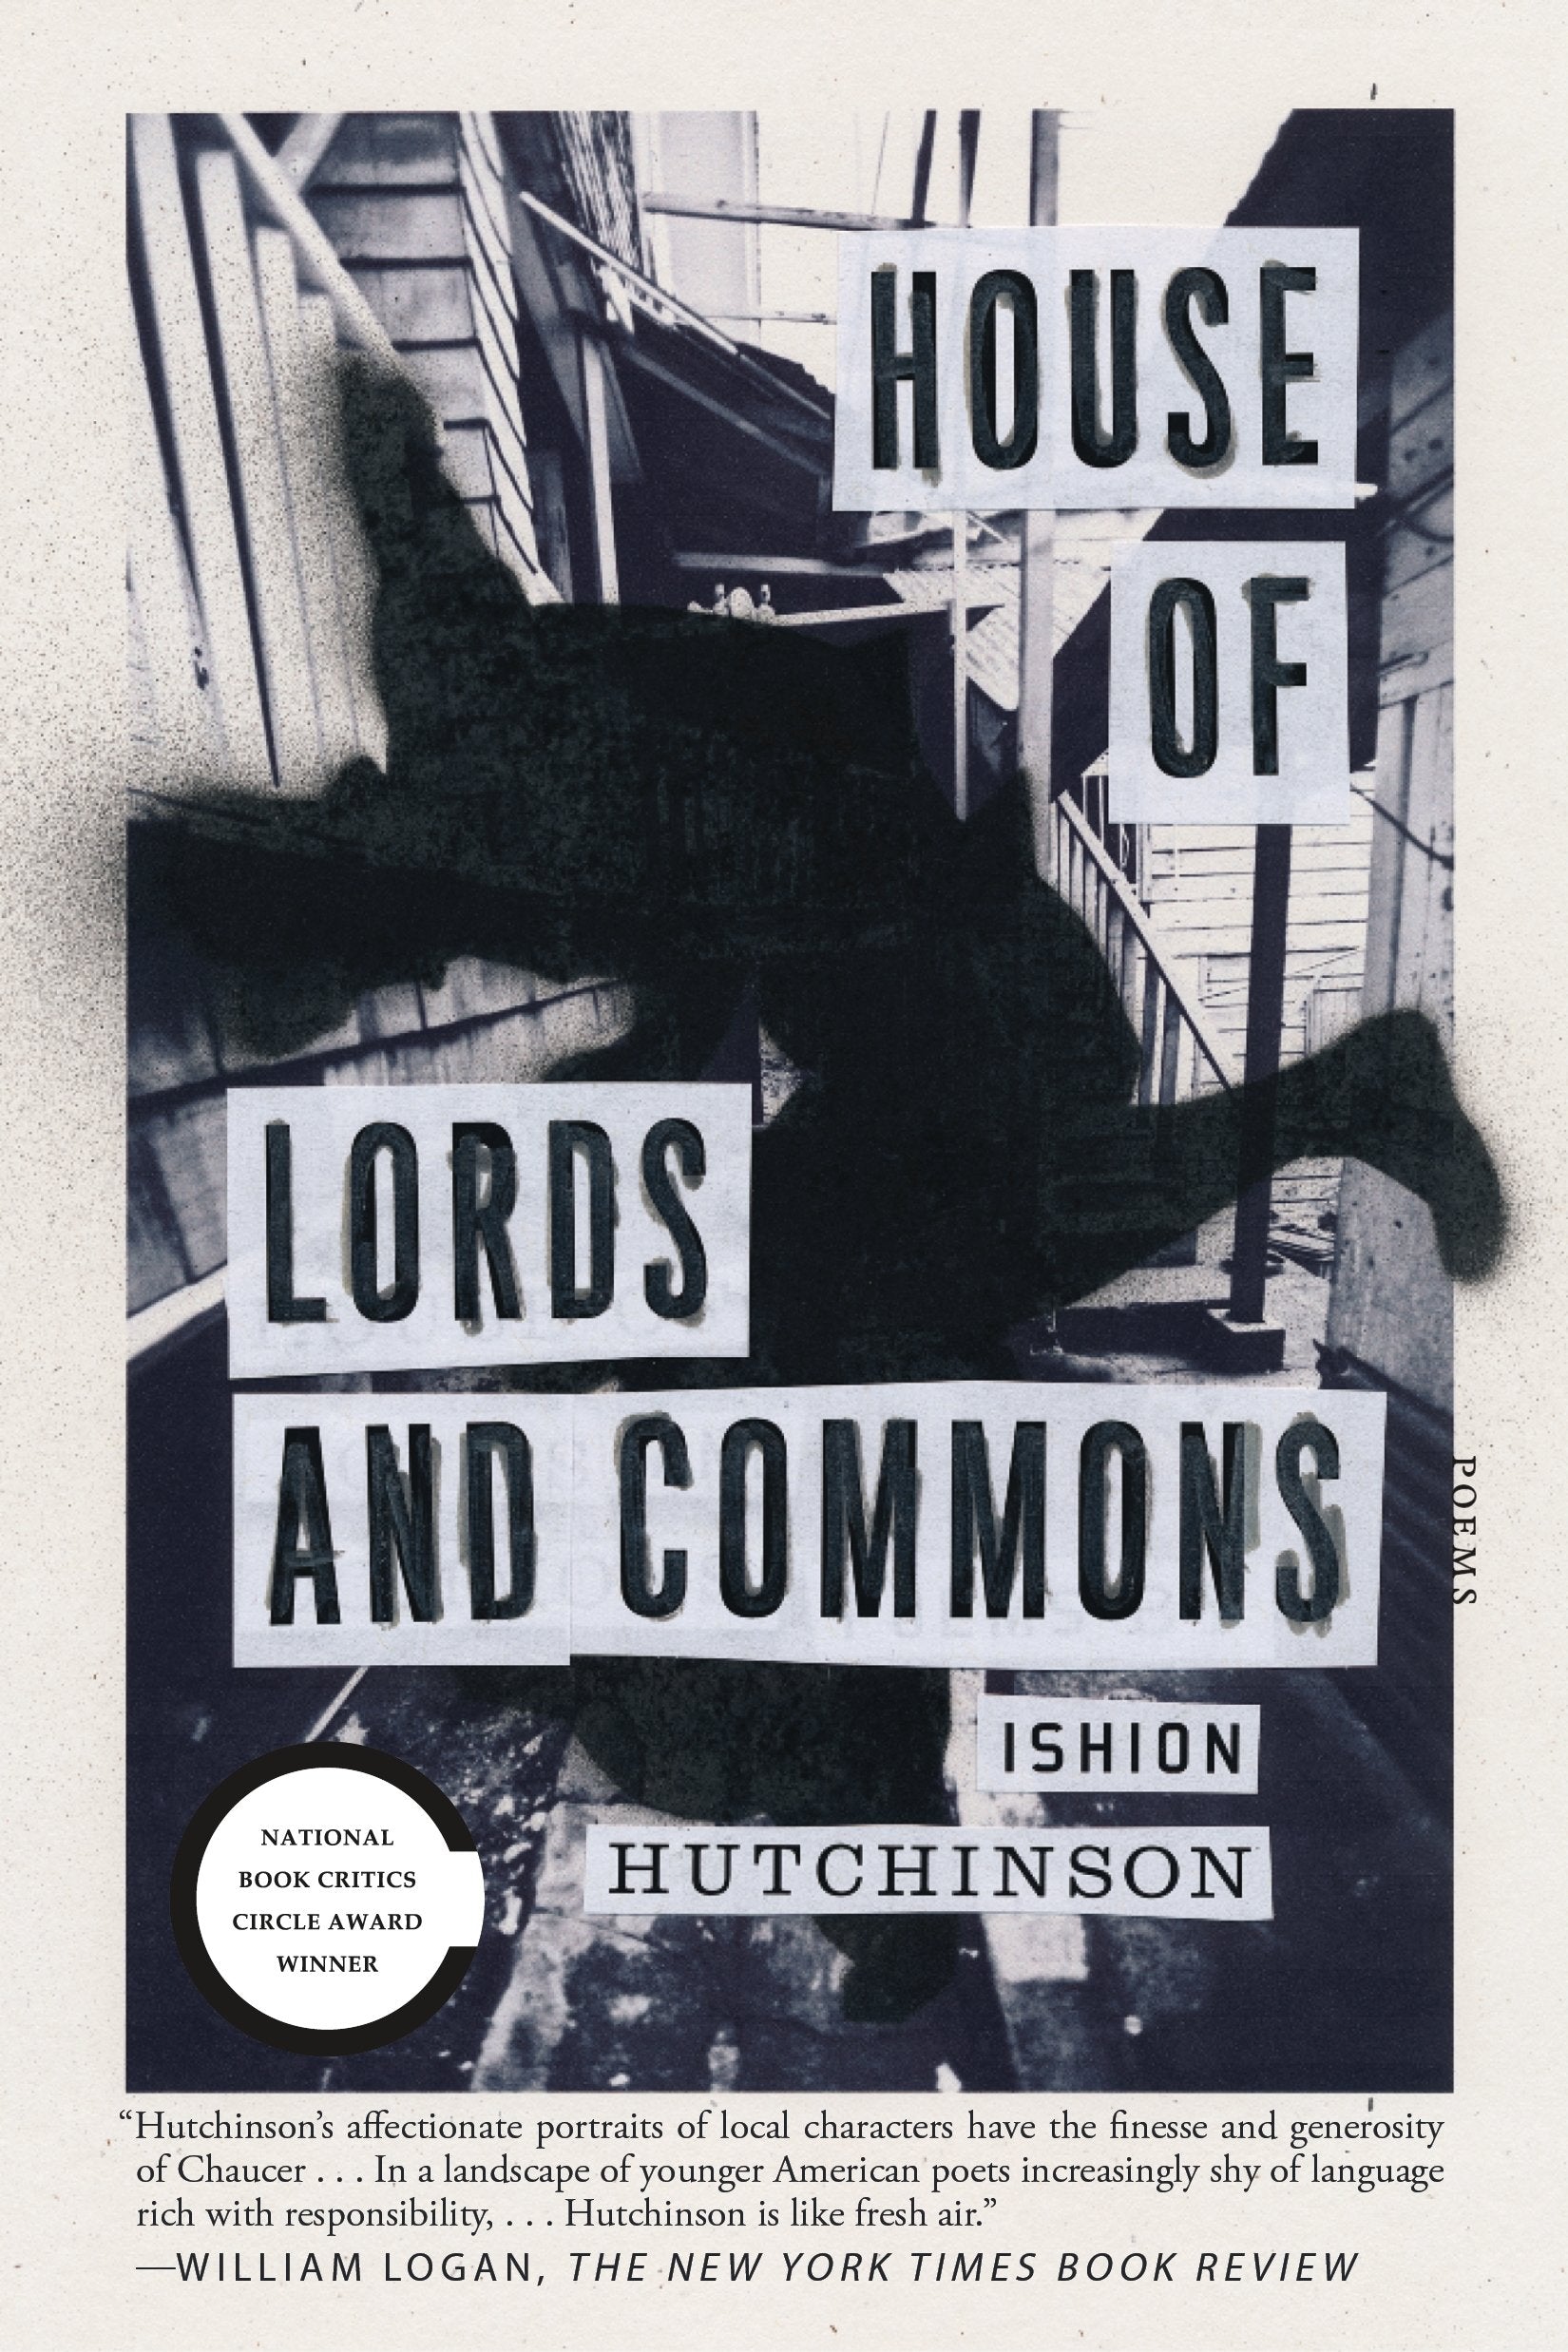 HOUSE OF LORDS AND COMMONS - Virginia Book Company